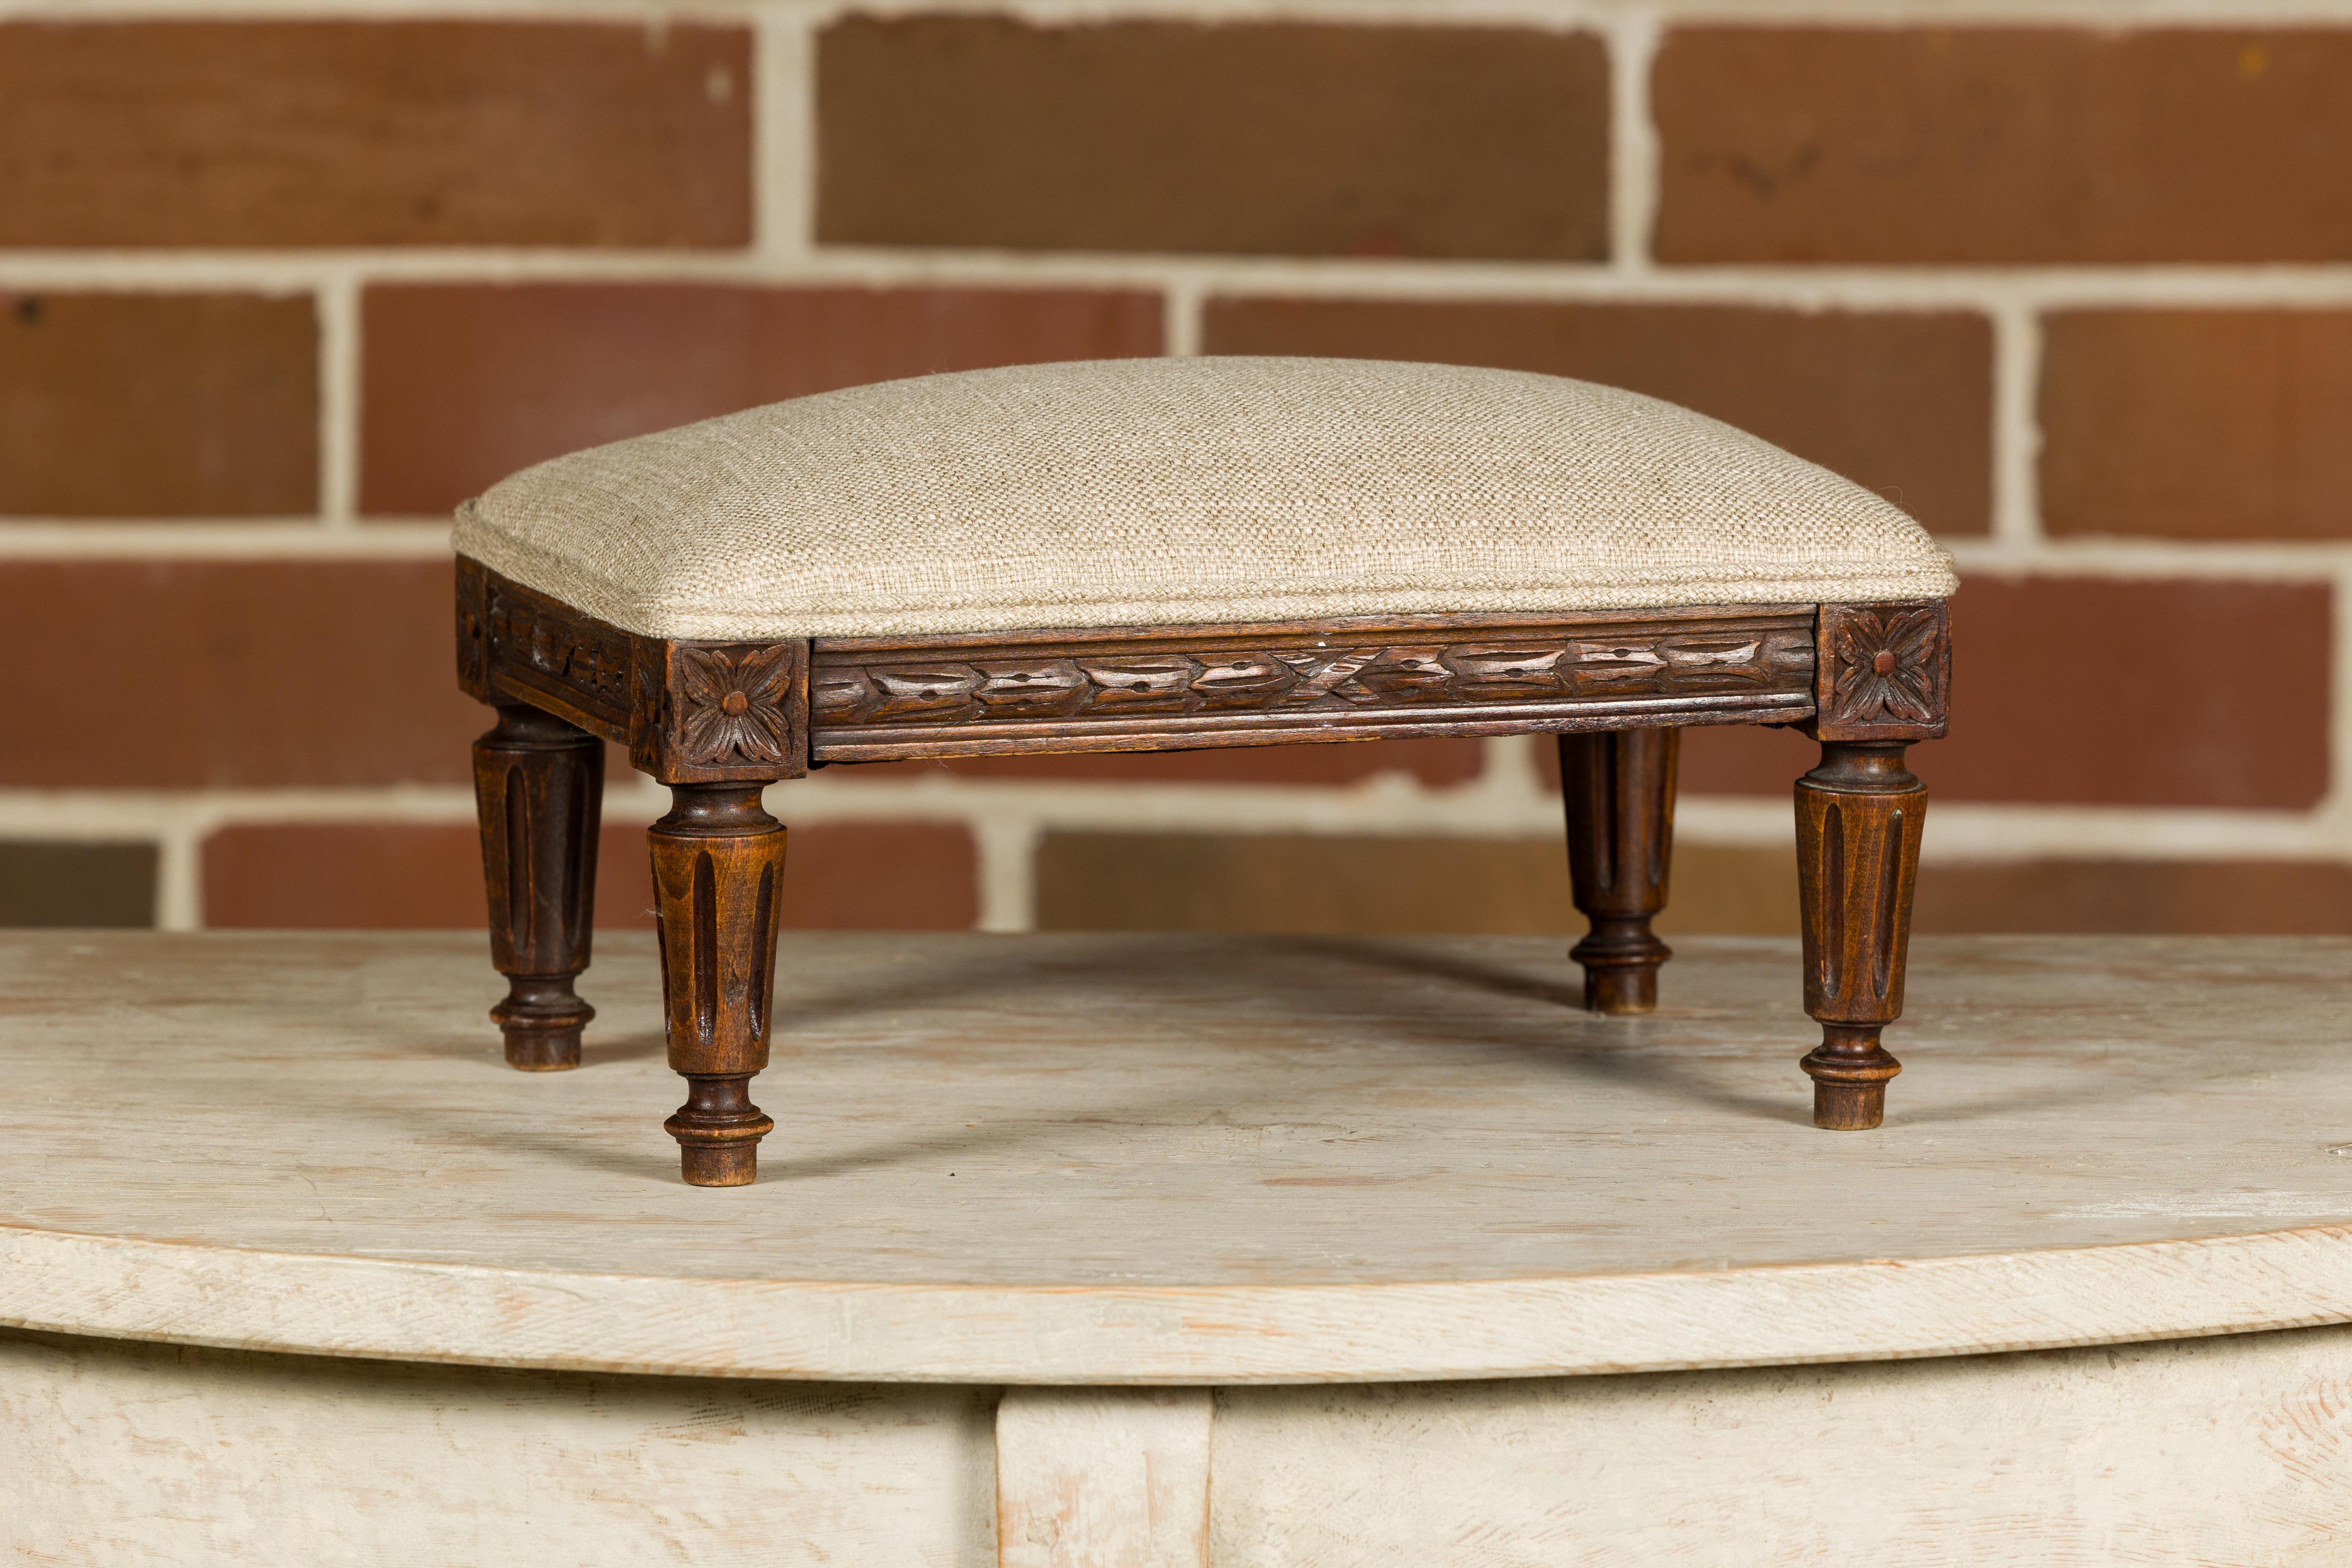 French Louis XVI Style 19th Century Footstool with Carved Décor and Fluted Legs For Sale 1